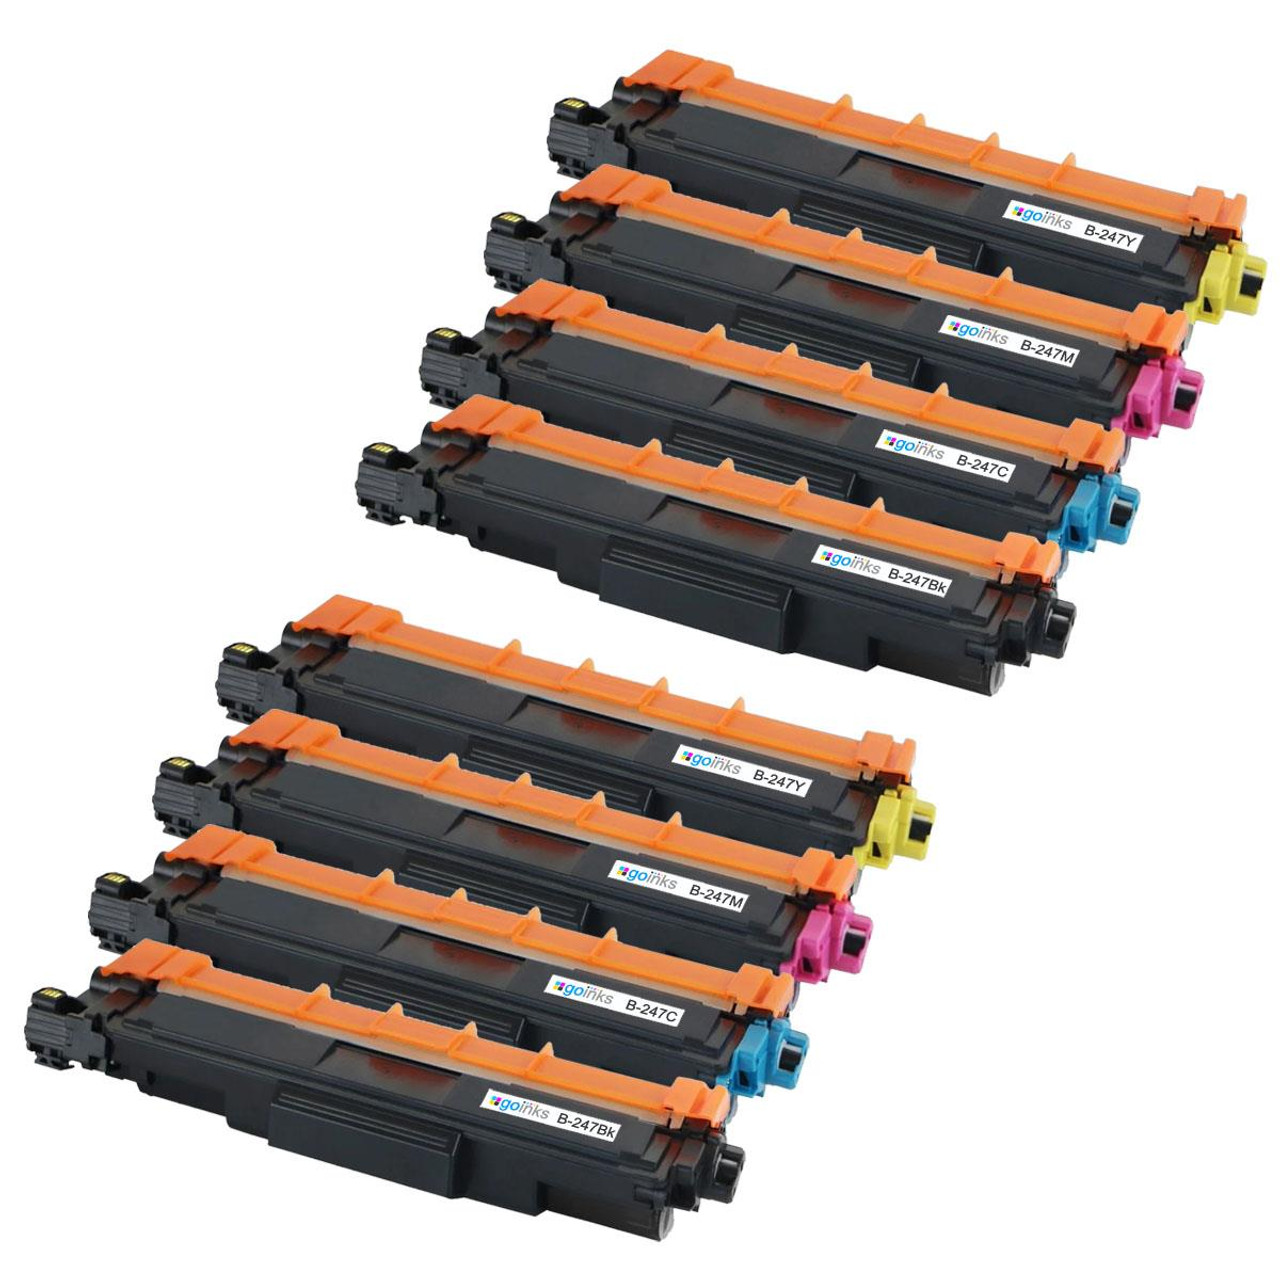 2 Go Inks Set of 4 Laser Toner Cartridges to replace Brother TN247 (XL  Capacity) Compatible / non-OEM for Brother DCP, MFC & HL Printers